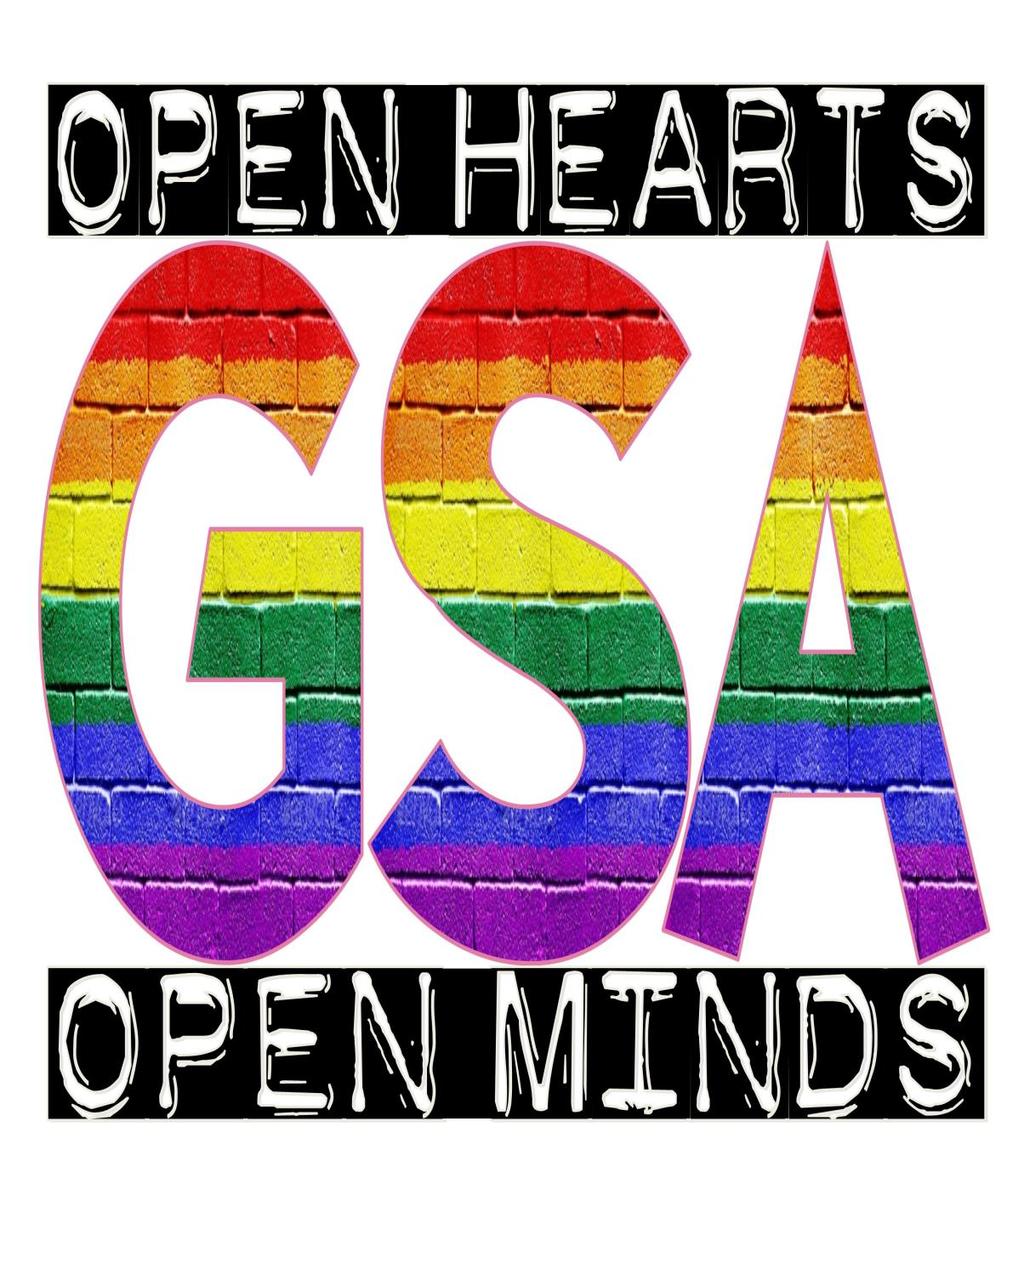 GSA will have a meeting on Thursday, February 21 2:15pm